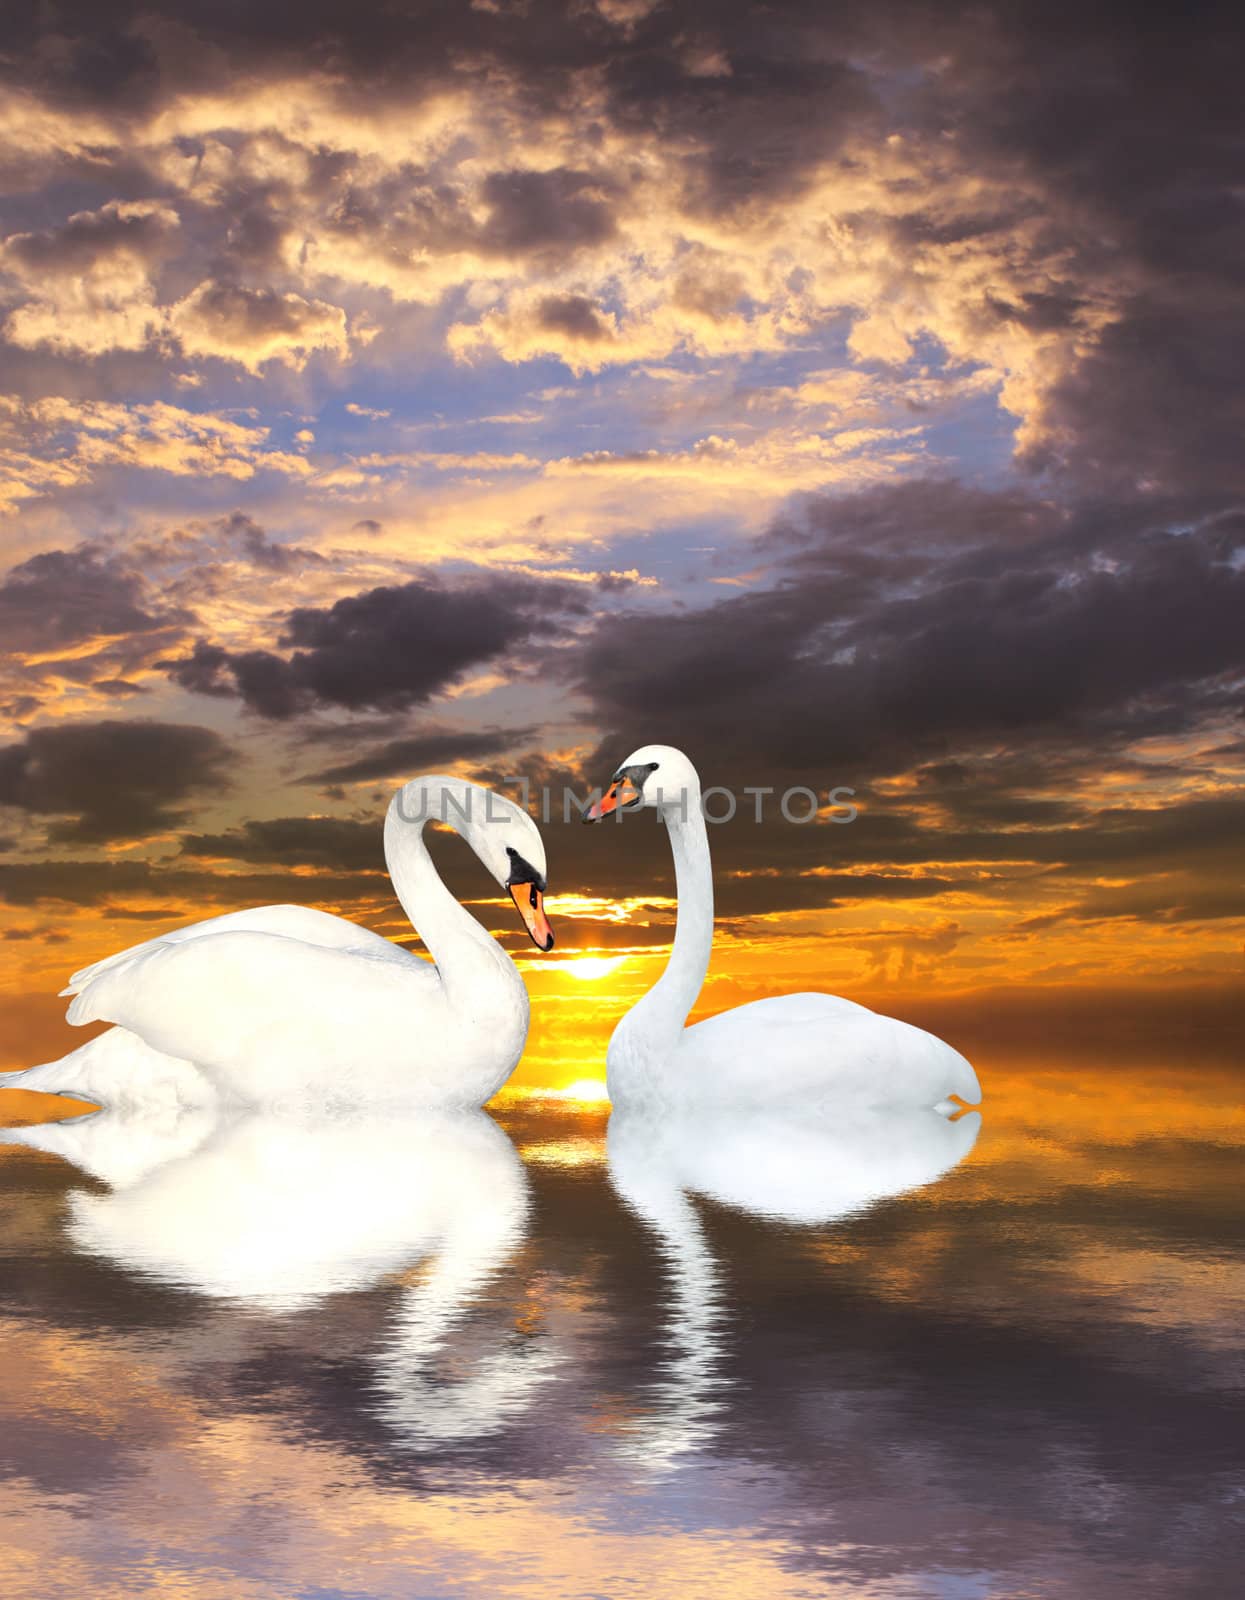 Two white swans